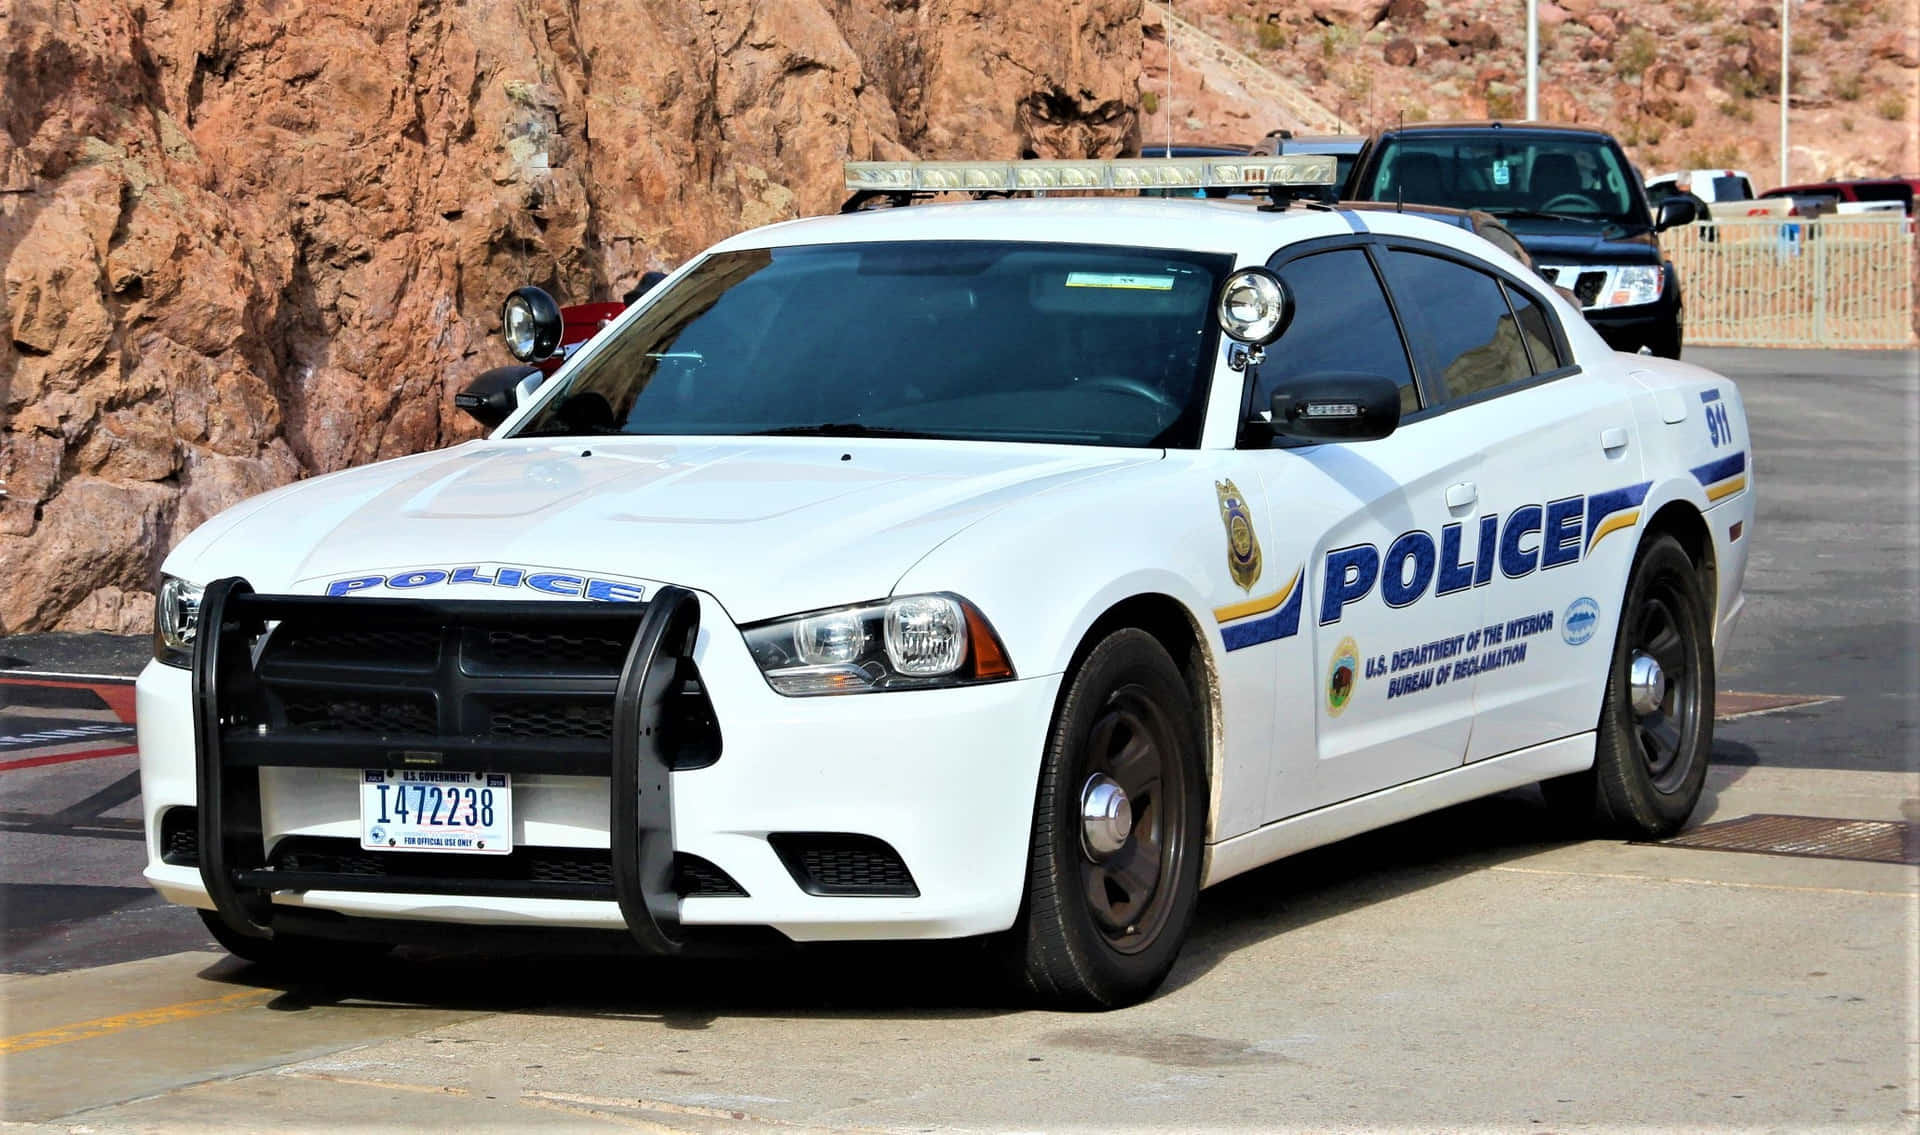 A sleek and sophisticated police car